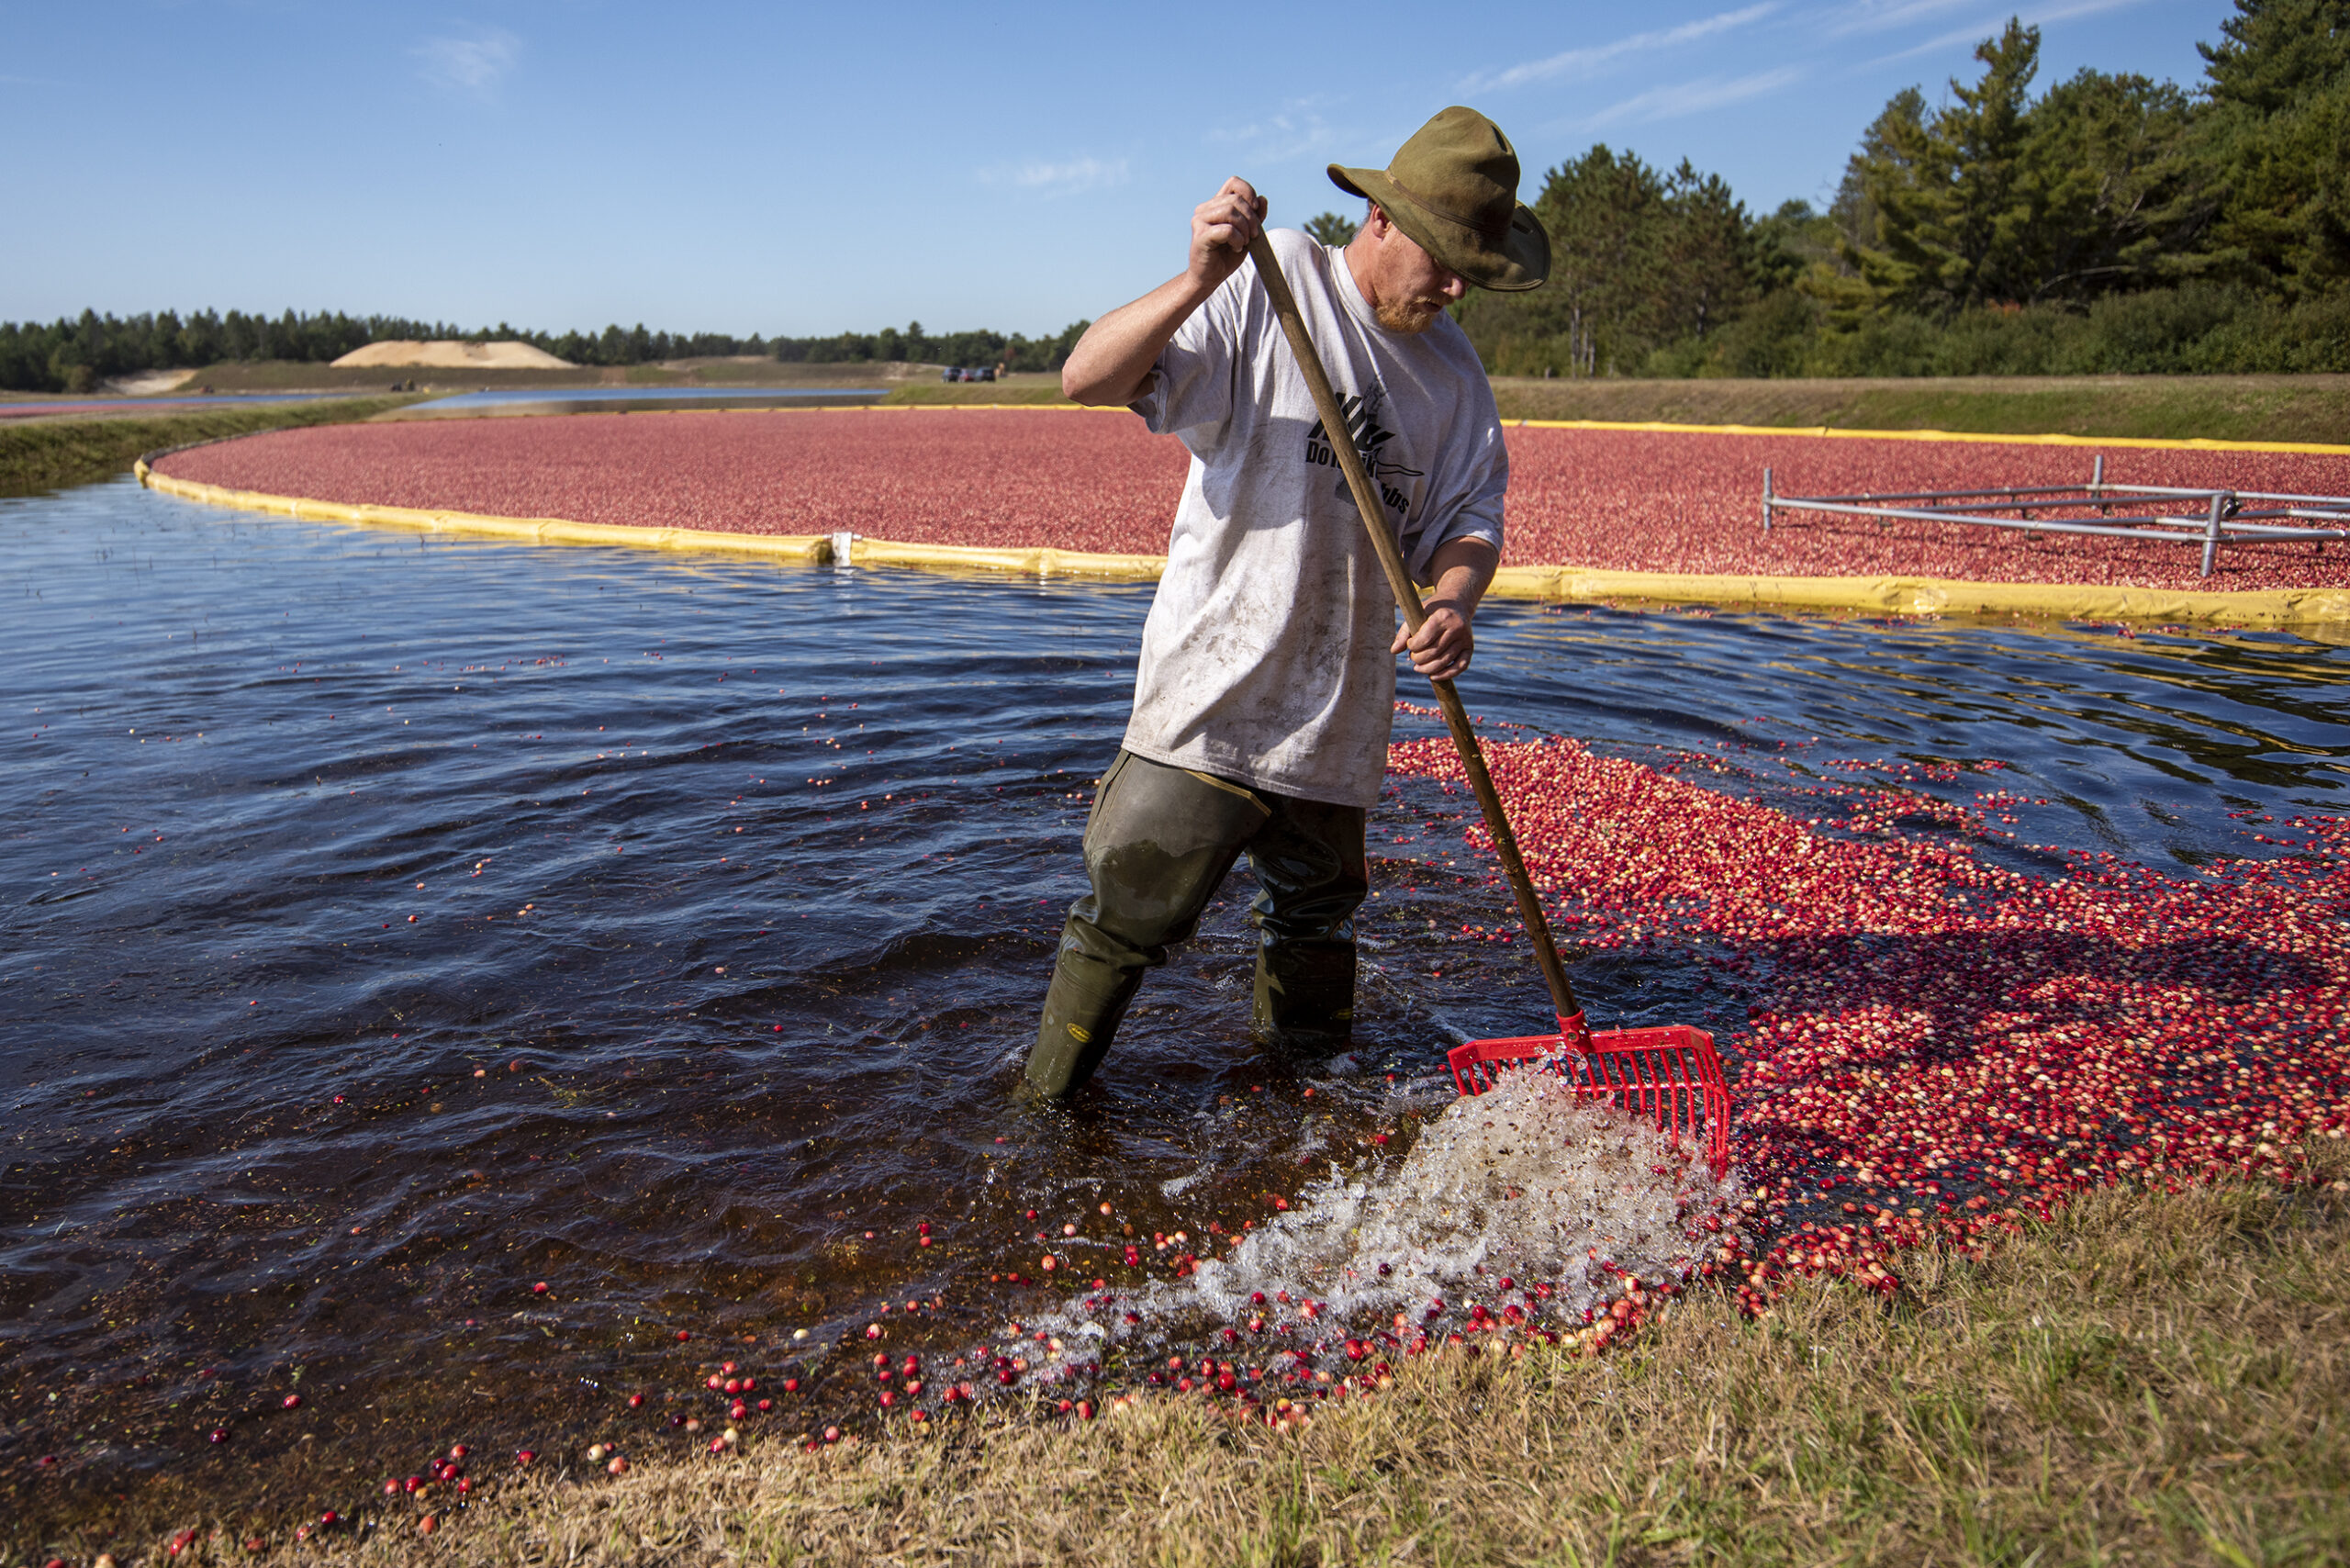 A worker uses a rake to move cranberries floating on top of water.